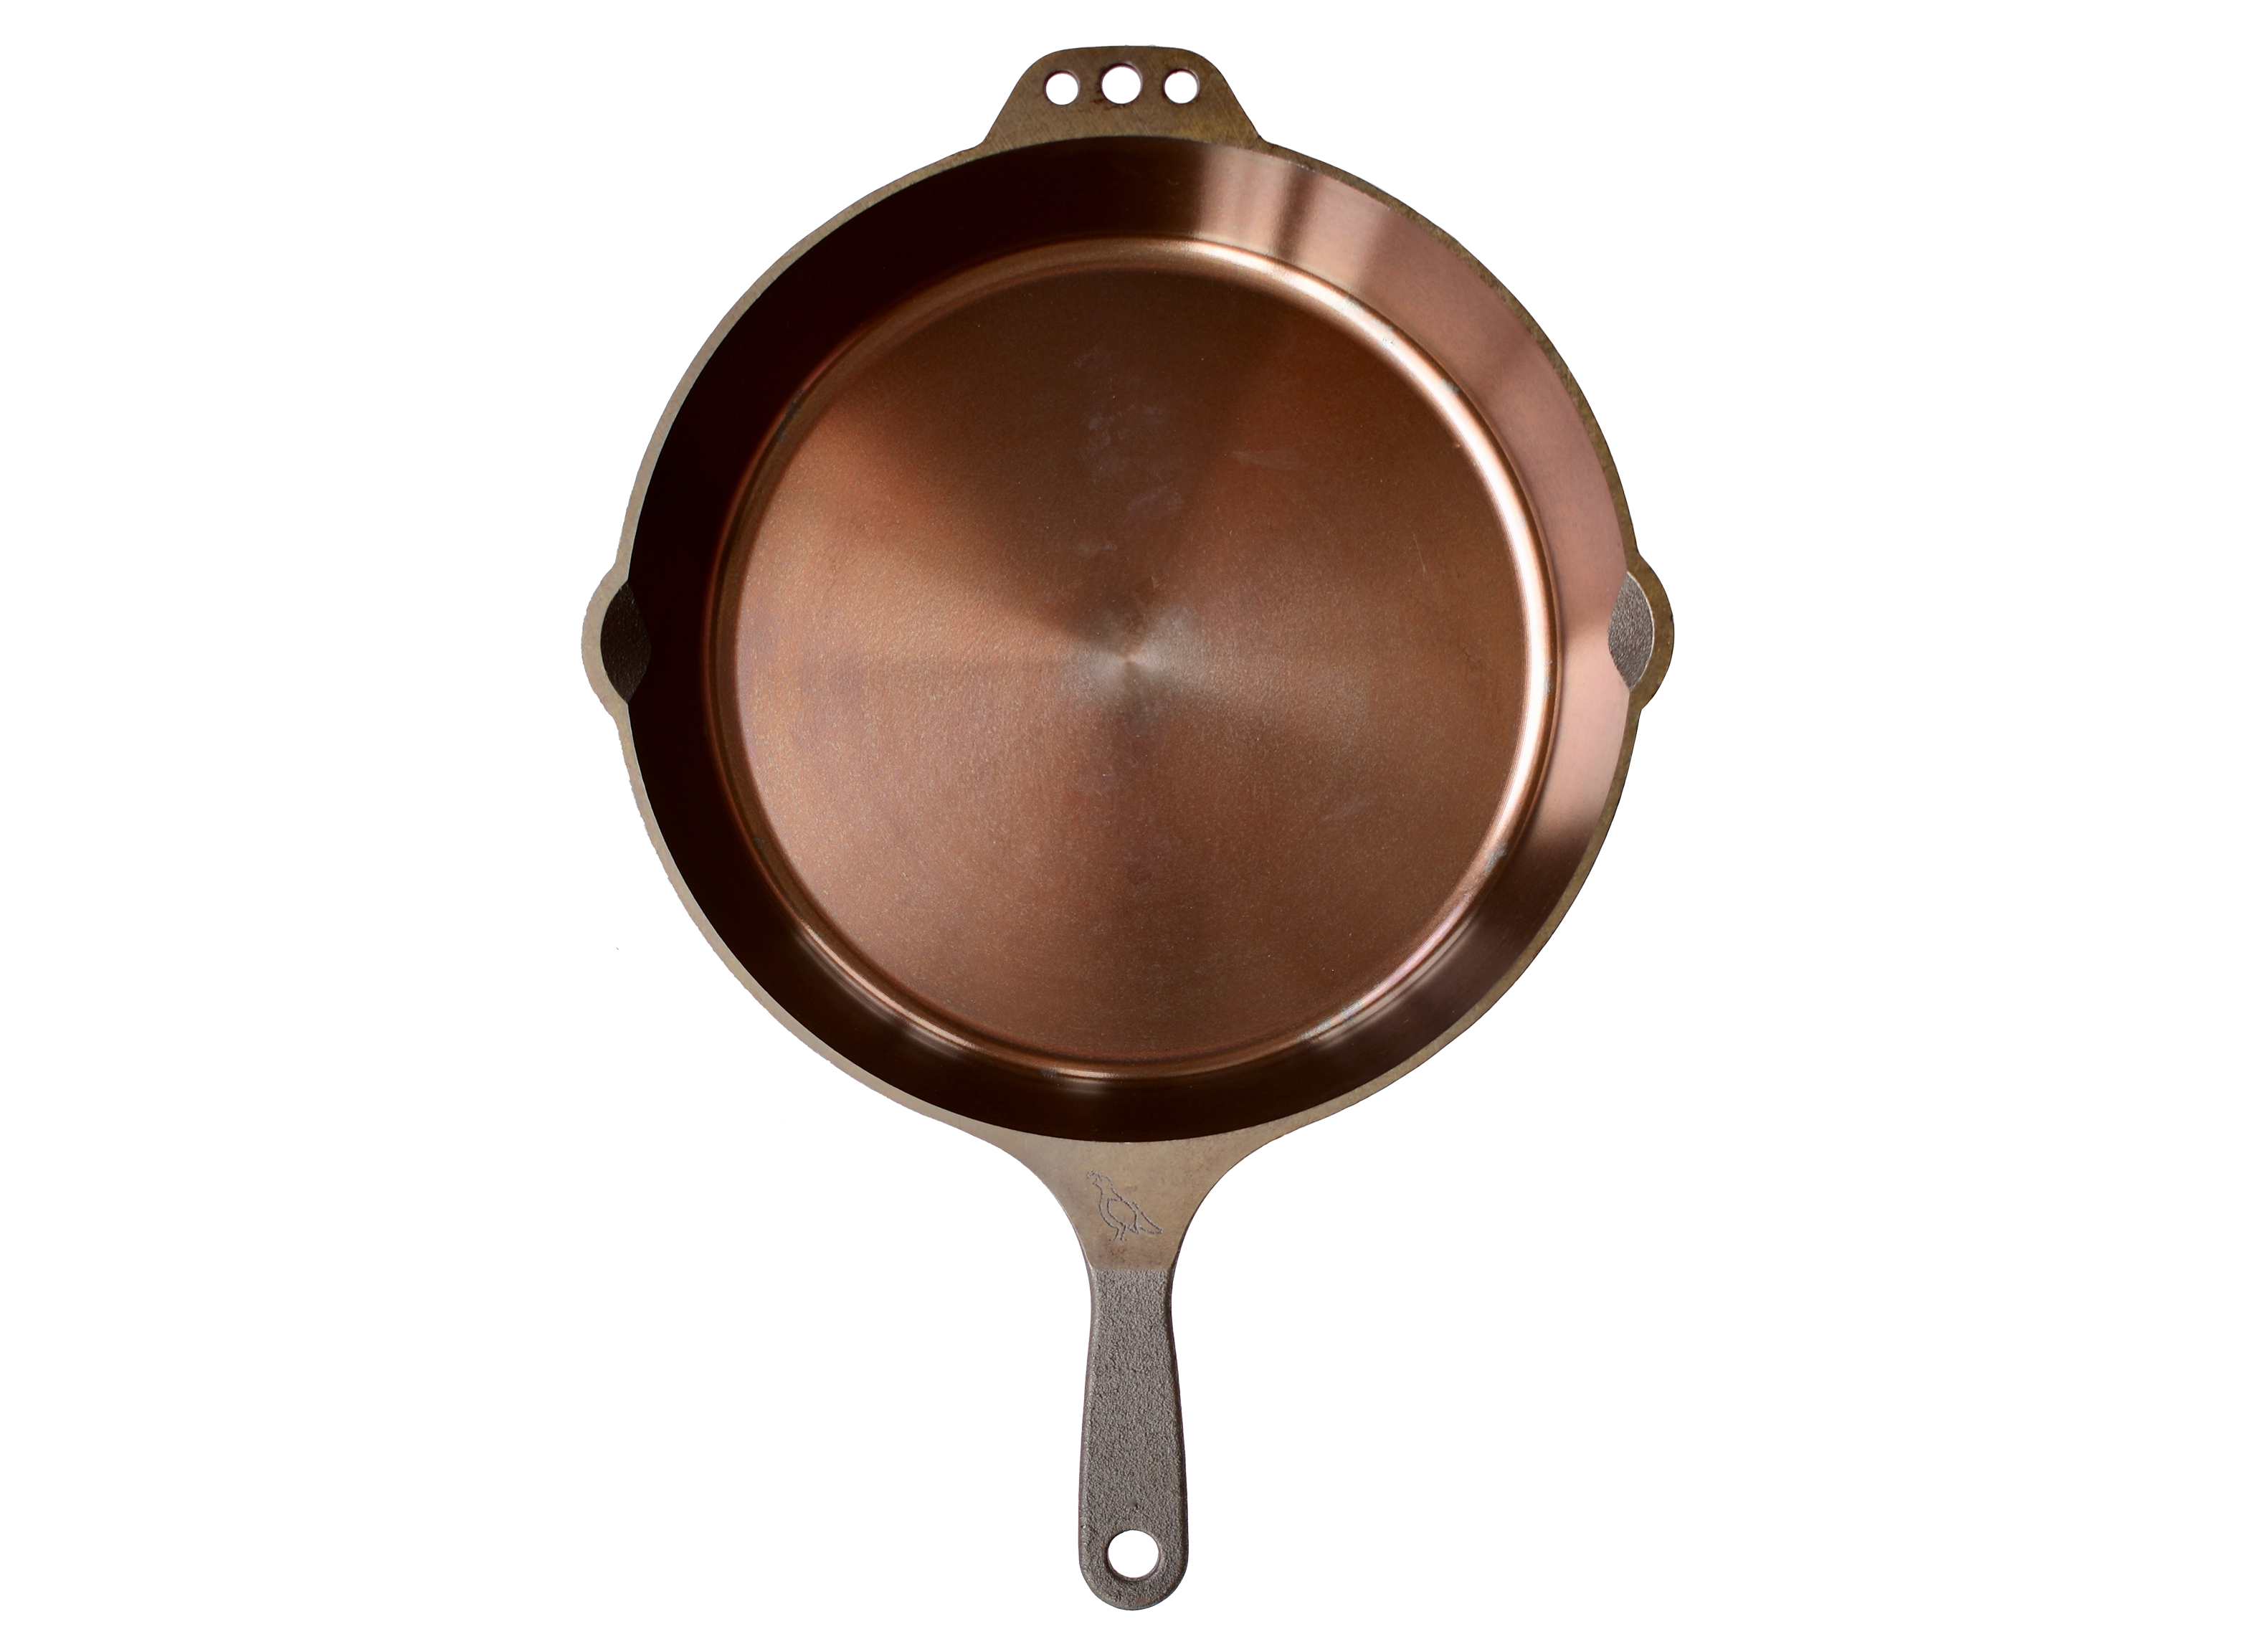 https://crdms.images.consumerreports.org/prod/products/cr/models/398267-frying-pans-cast-iron-smithey-ironware-cast-iron-skillet-10004114.png